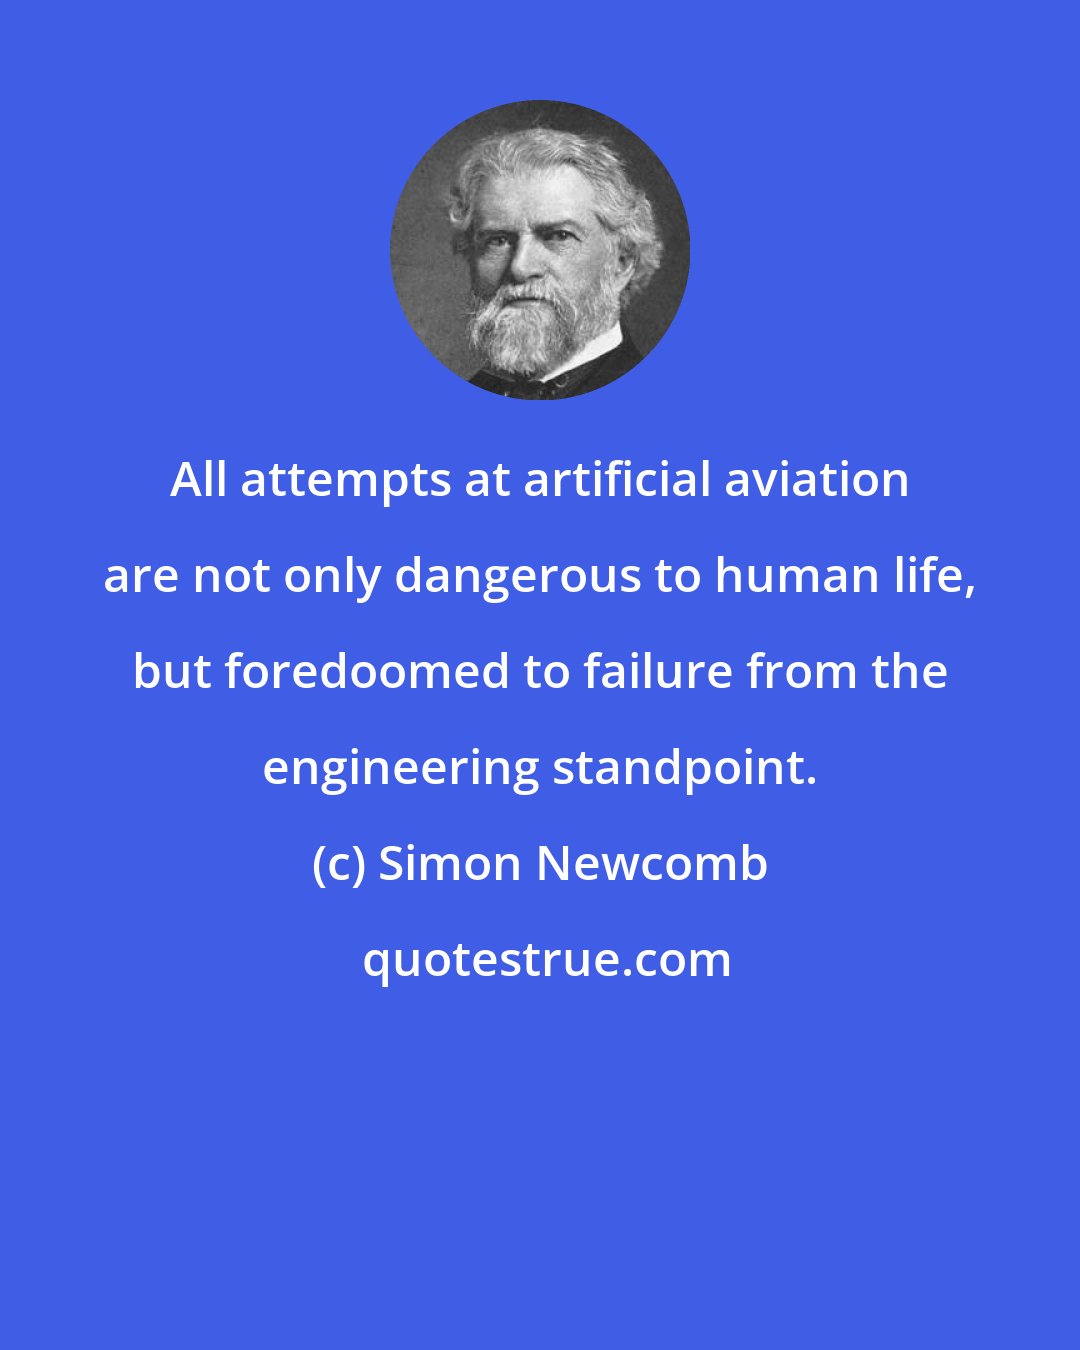 Simon Newcomb: All attempts at artificial aviation are not only dangerous to human life, but foredoomed to failure from the engineering standpoint.